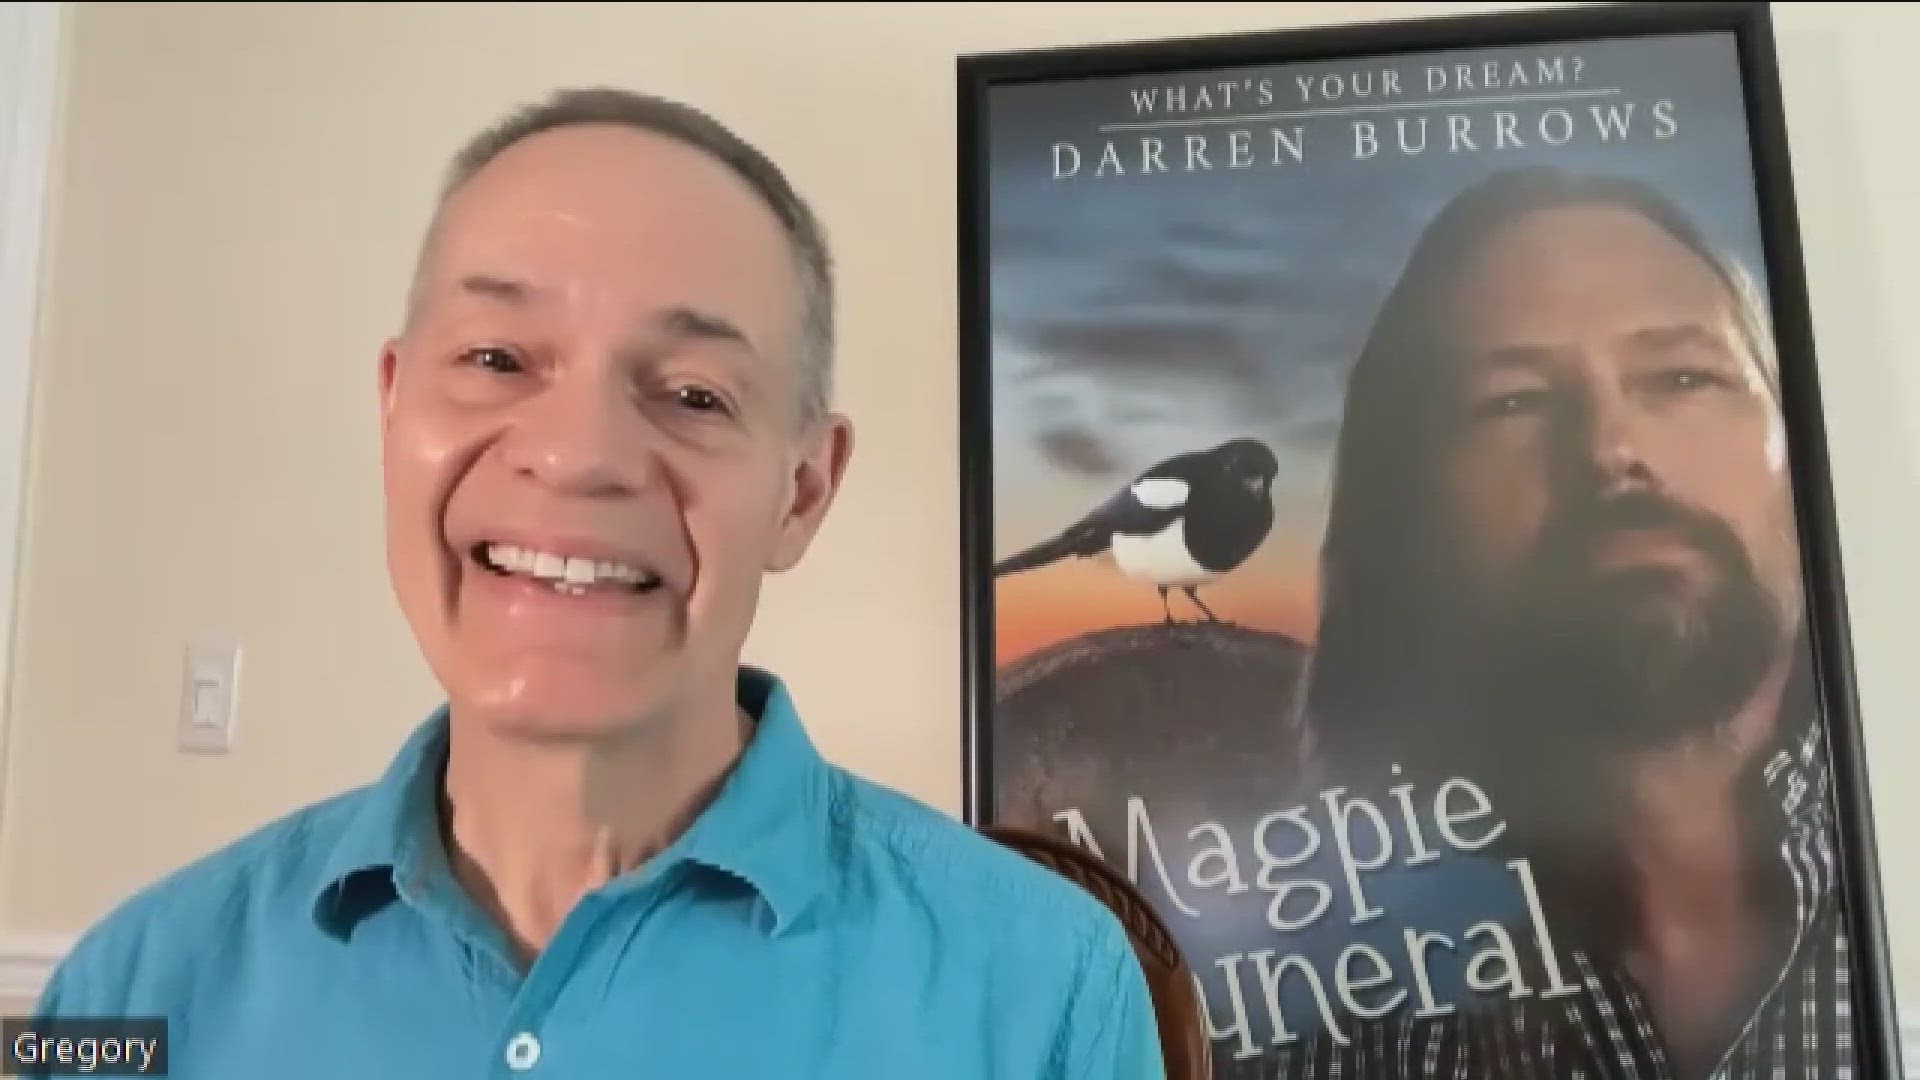 Greg Green – the director, writer and producer behind "Magpie Funeral" – told KTVB it was important for the film to debut in Idaho, where some of it was shot.